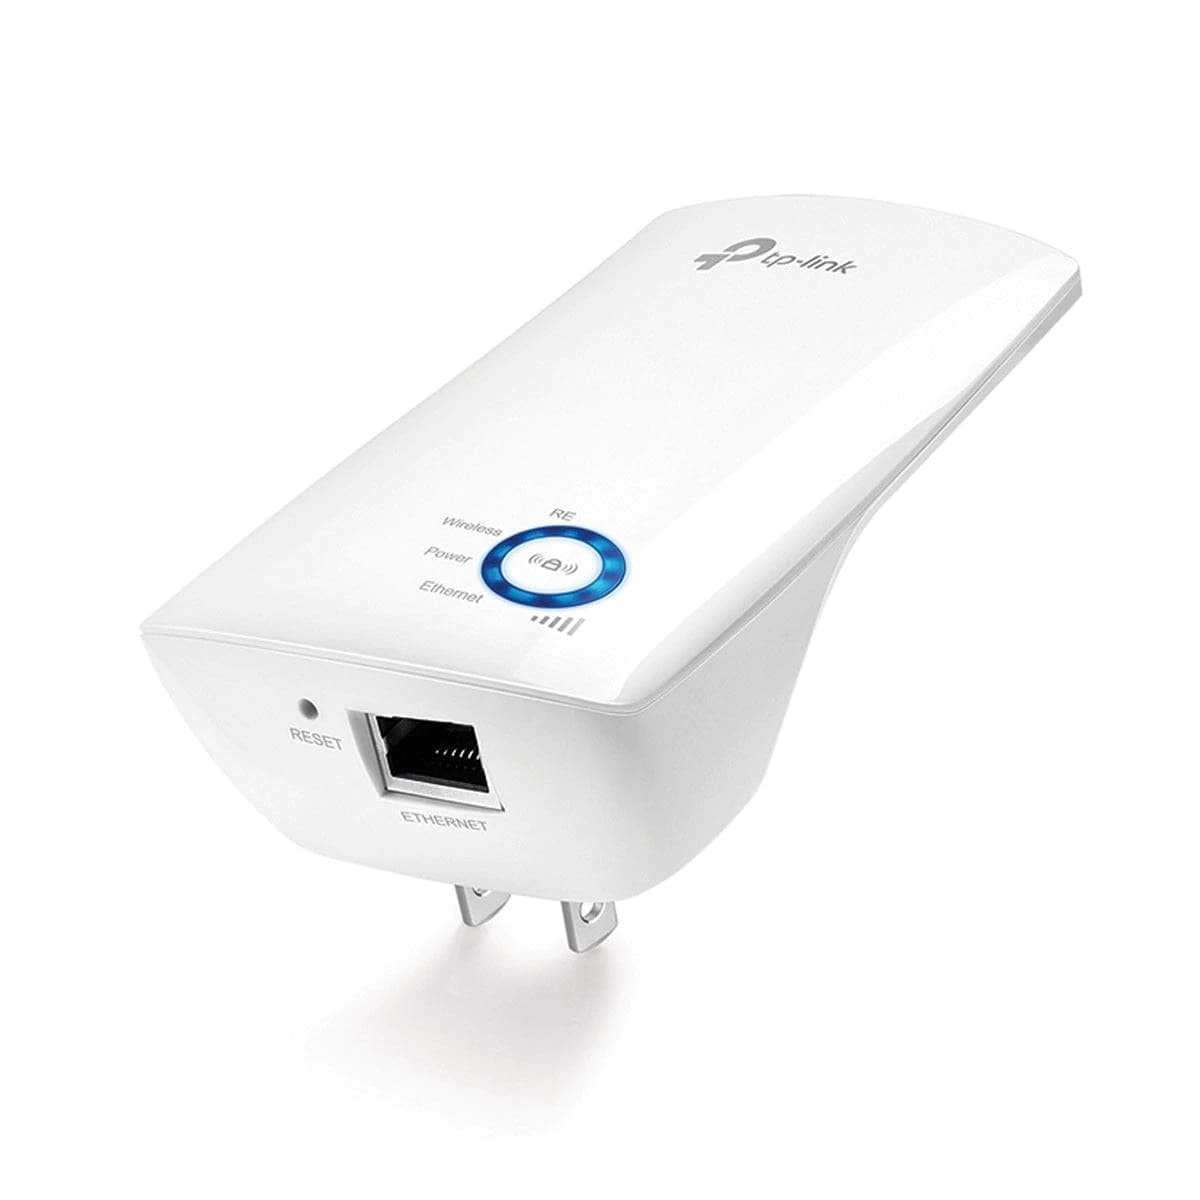 Repetidor wifi TP-Link TL-WA850RE, 300 Mbps, 1 puerto ethernet